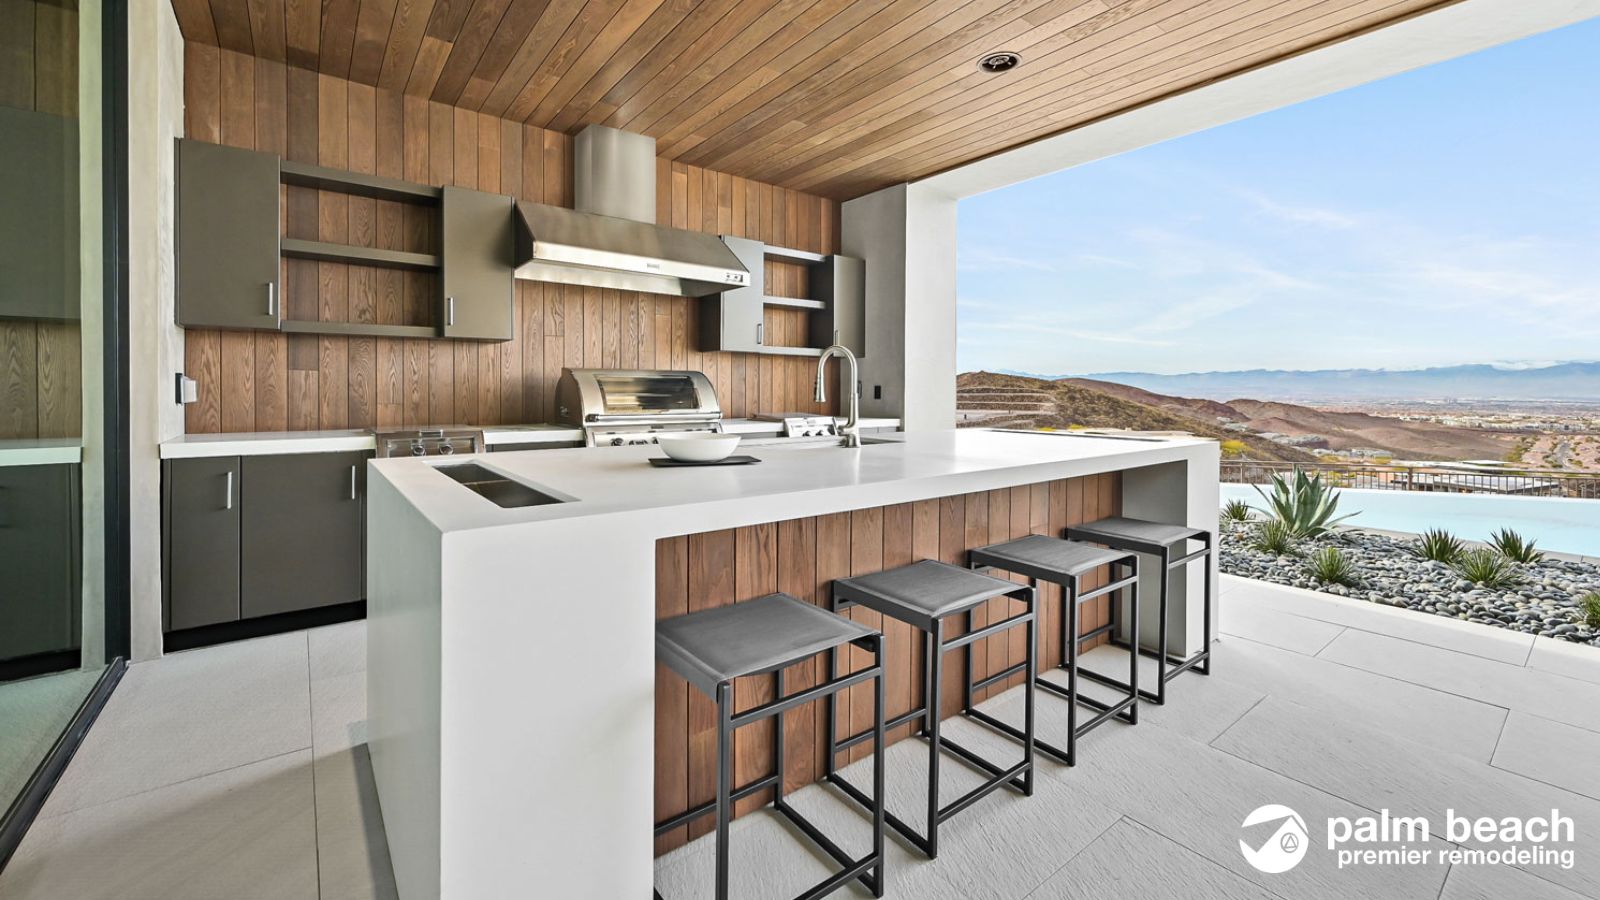 Residential & Commercial Outdoor Kitchen Design & Installation Services In Palm Beach, Florida